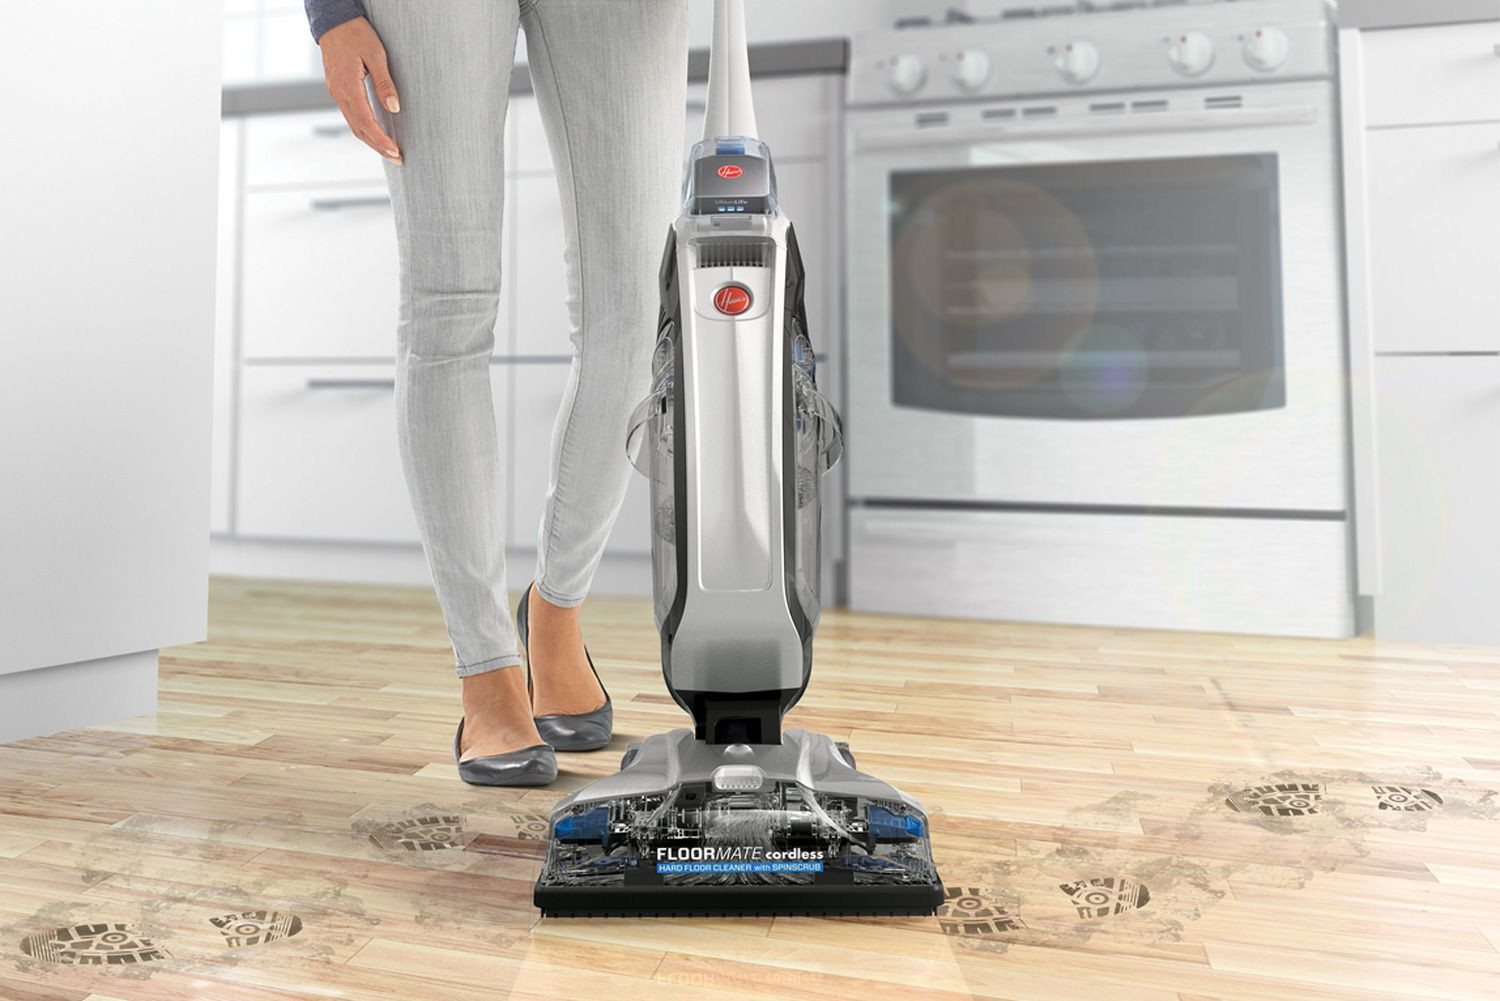 25 Lovable Hardwood Flooring Vacuums Recommendations 2024 free download hardwood flooring vacuums recommendations of hoover floormate cleaner review within hoover floormate 59a452af685fbe00102f4ce0